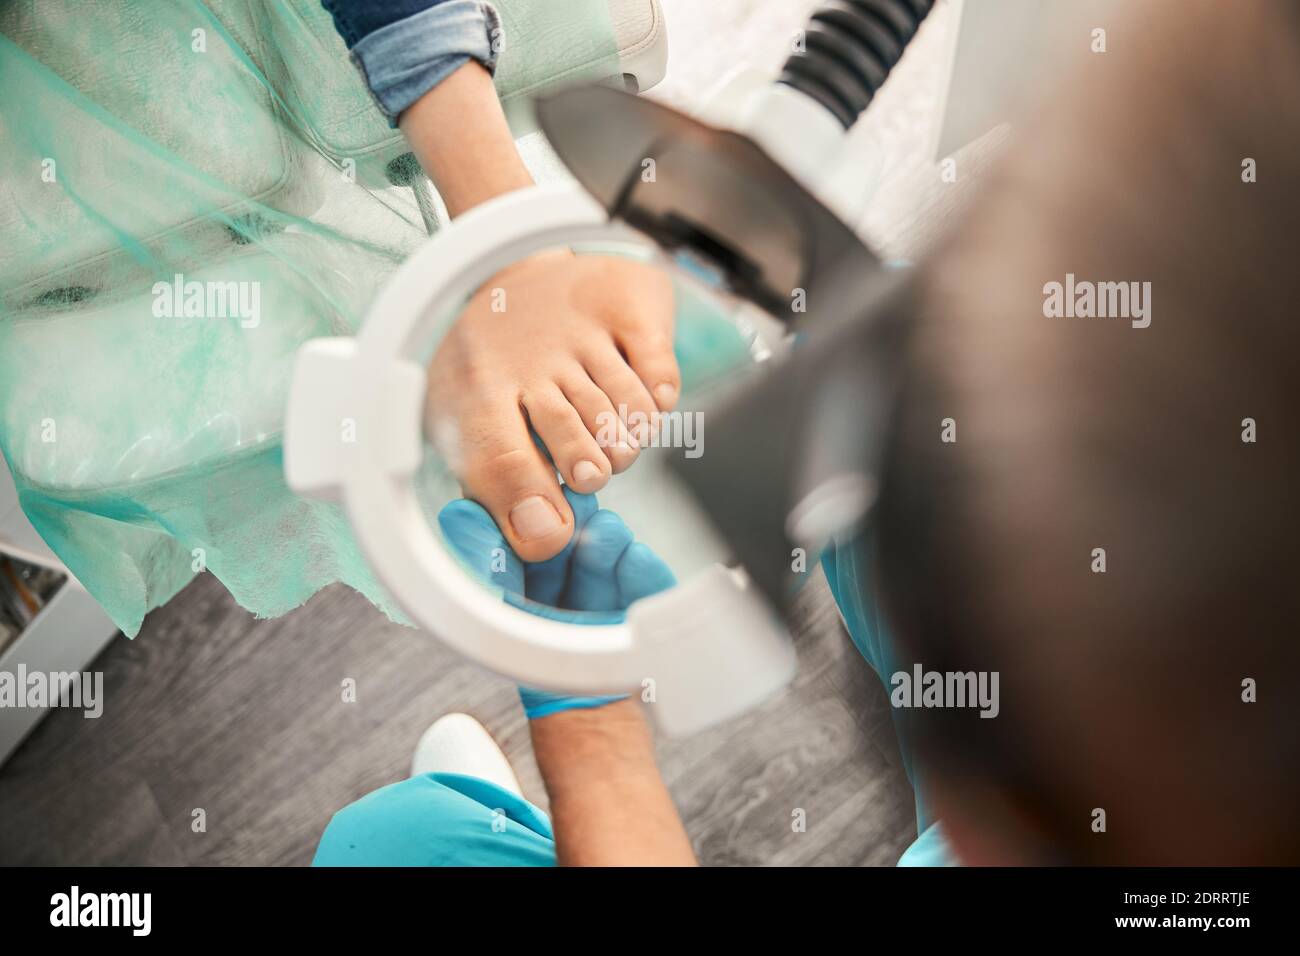 Attentive medical worker looking through magnifying glass Stock Photo